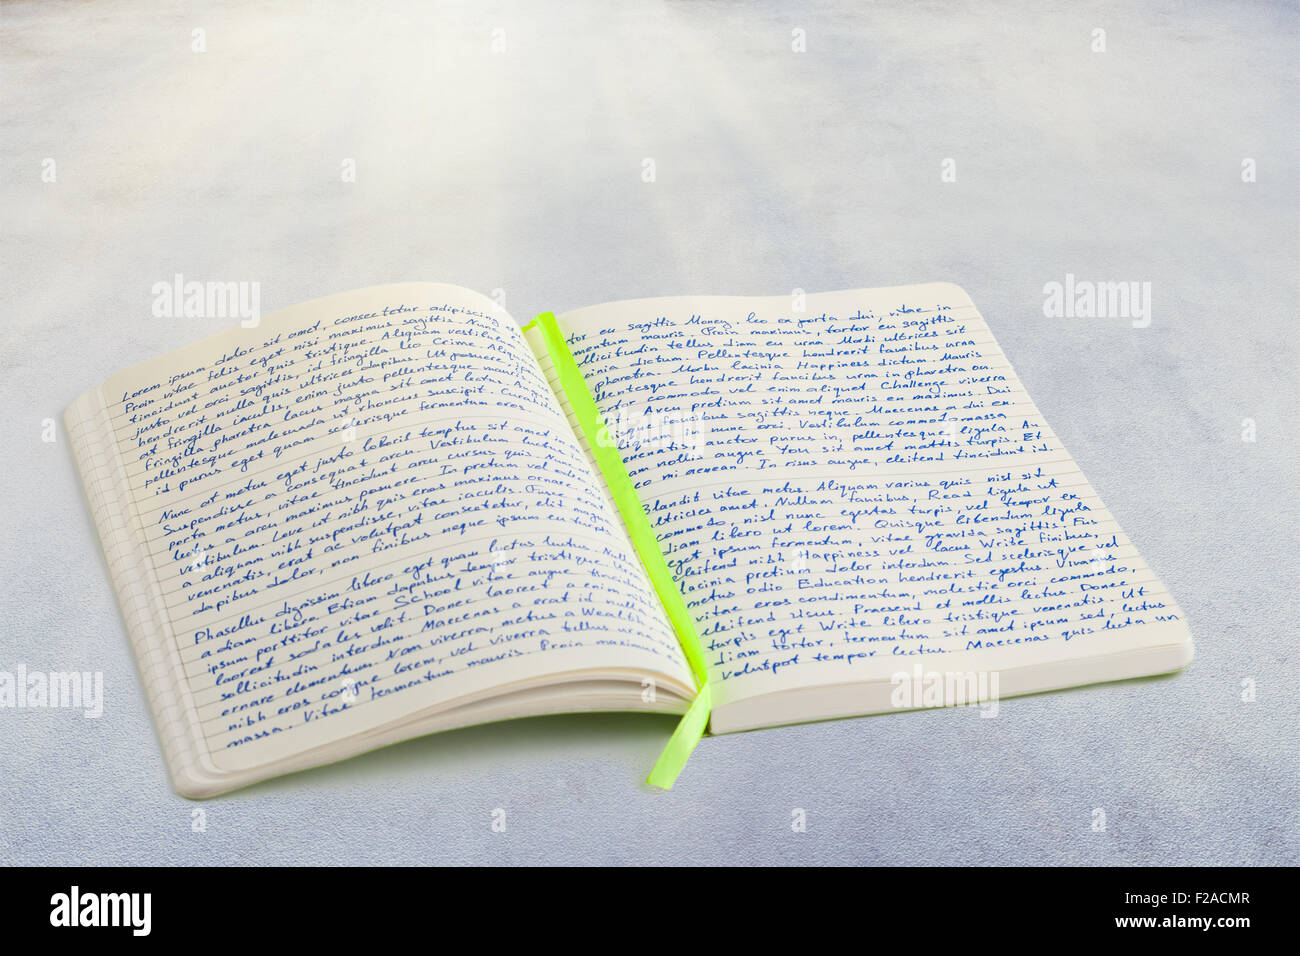 Open notebook with handwritten  lorem ipsum text and ribbon bookmark in the middle, laying on textured surface Stock Photo